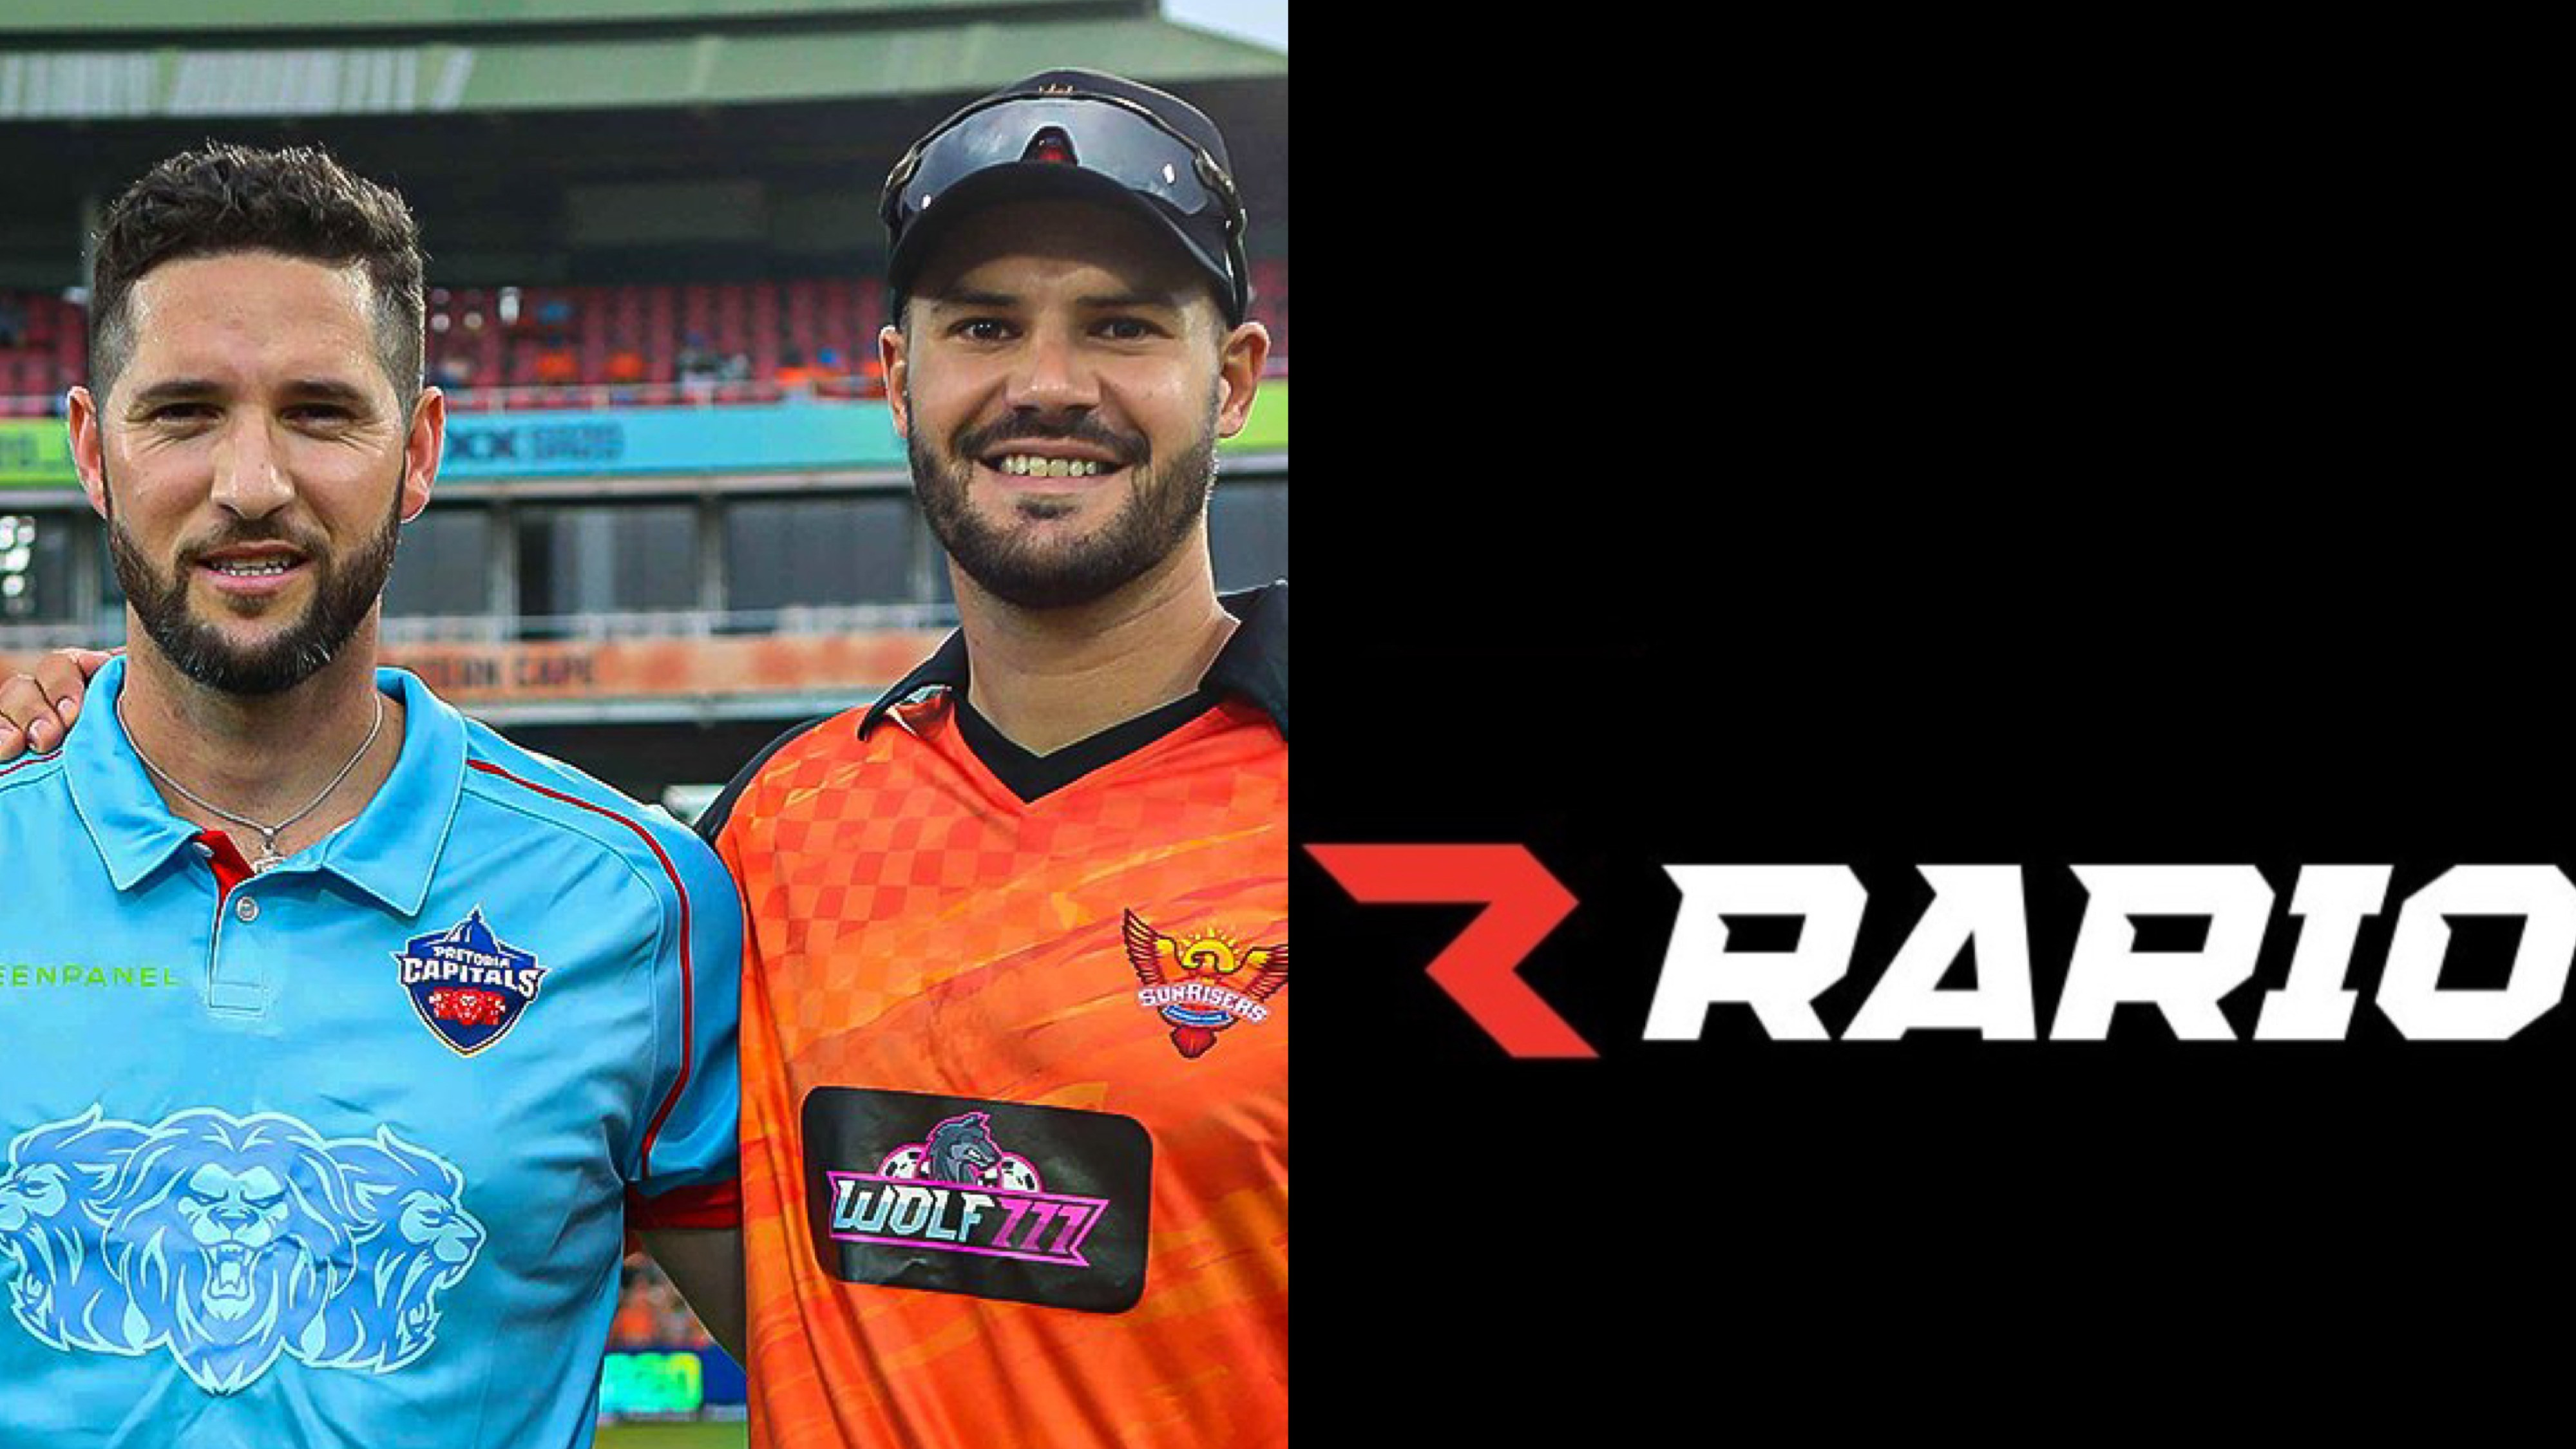 Rario D3 Predictions: Grab exciting player cards for the RSA T20 League and play to win great prizes.